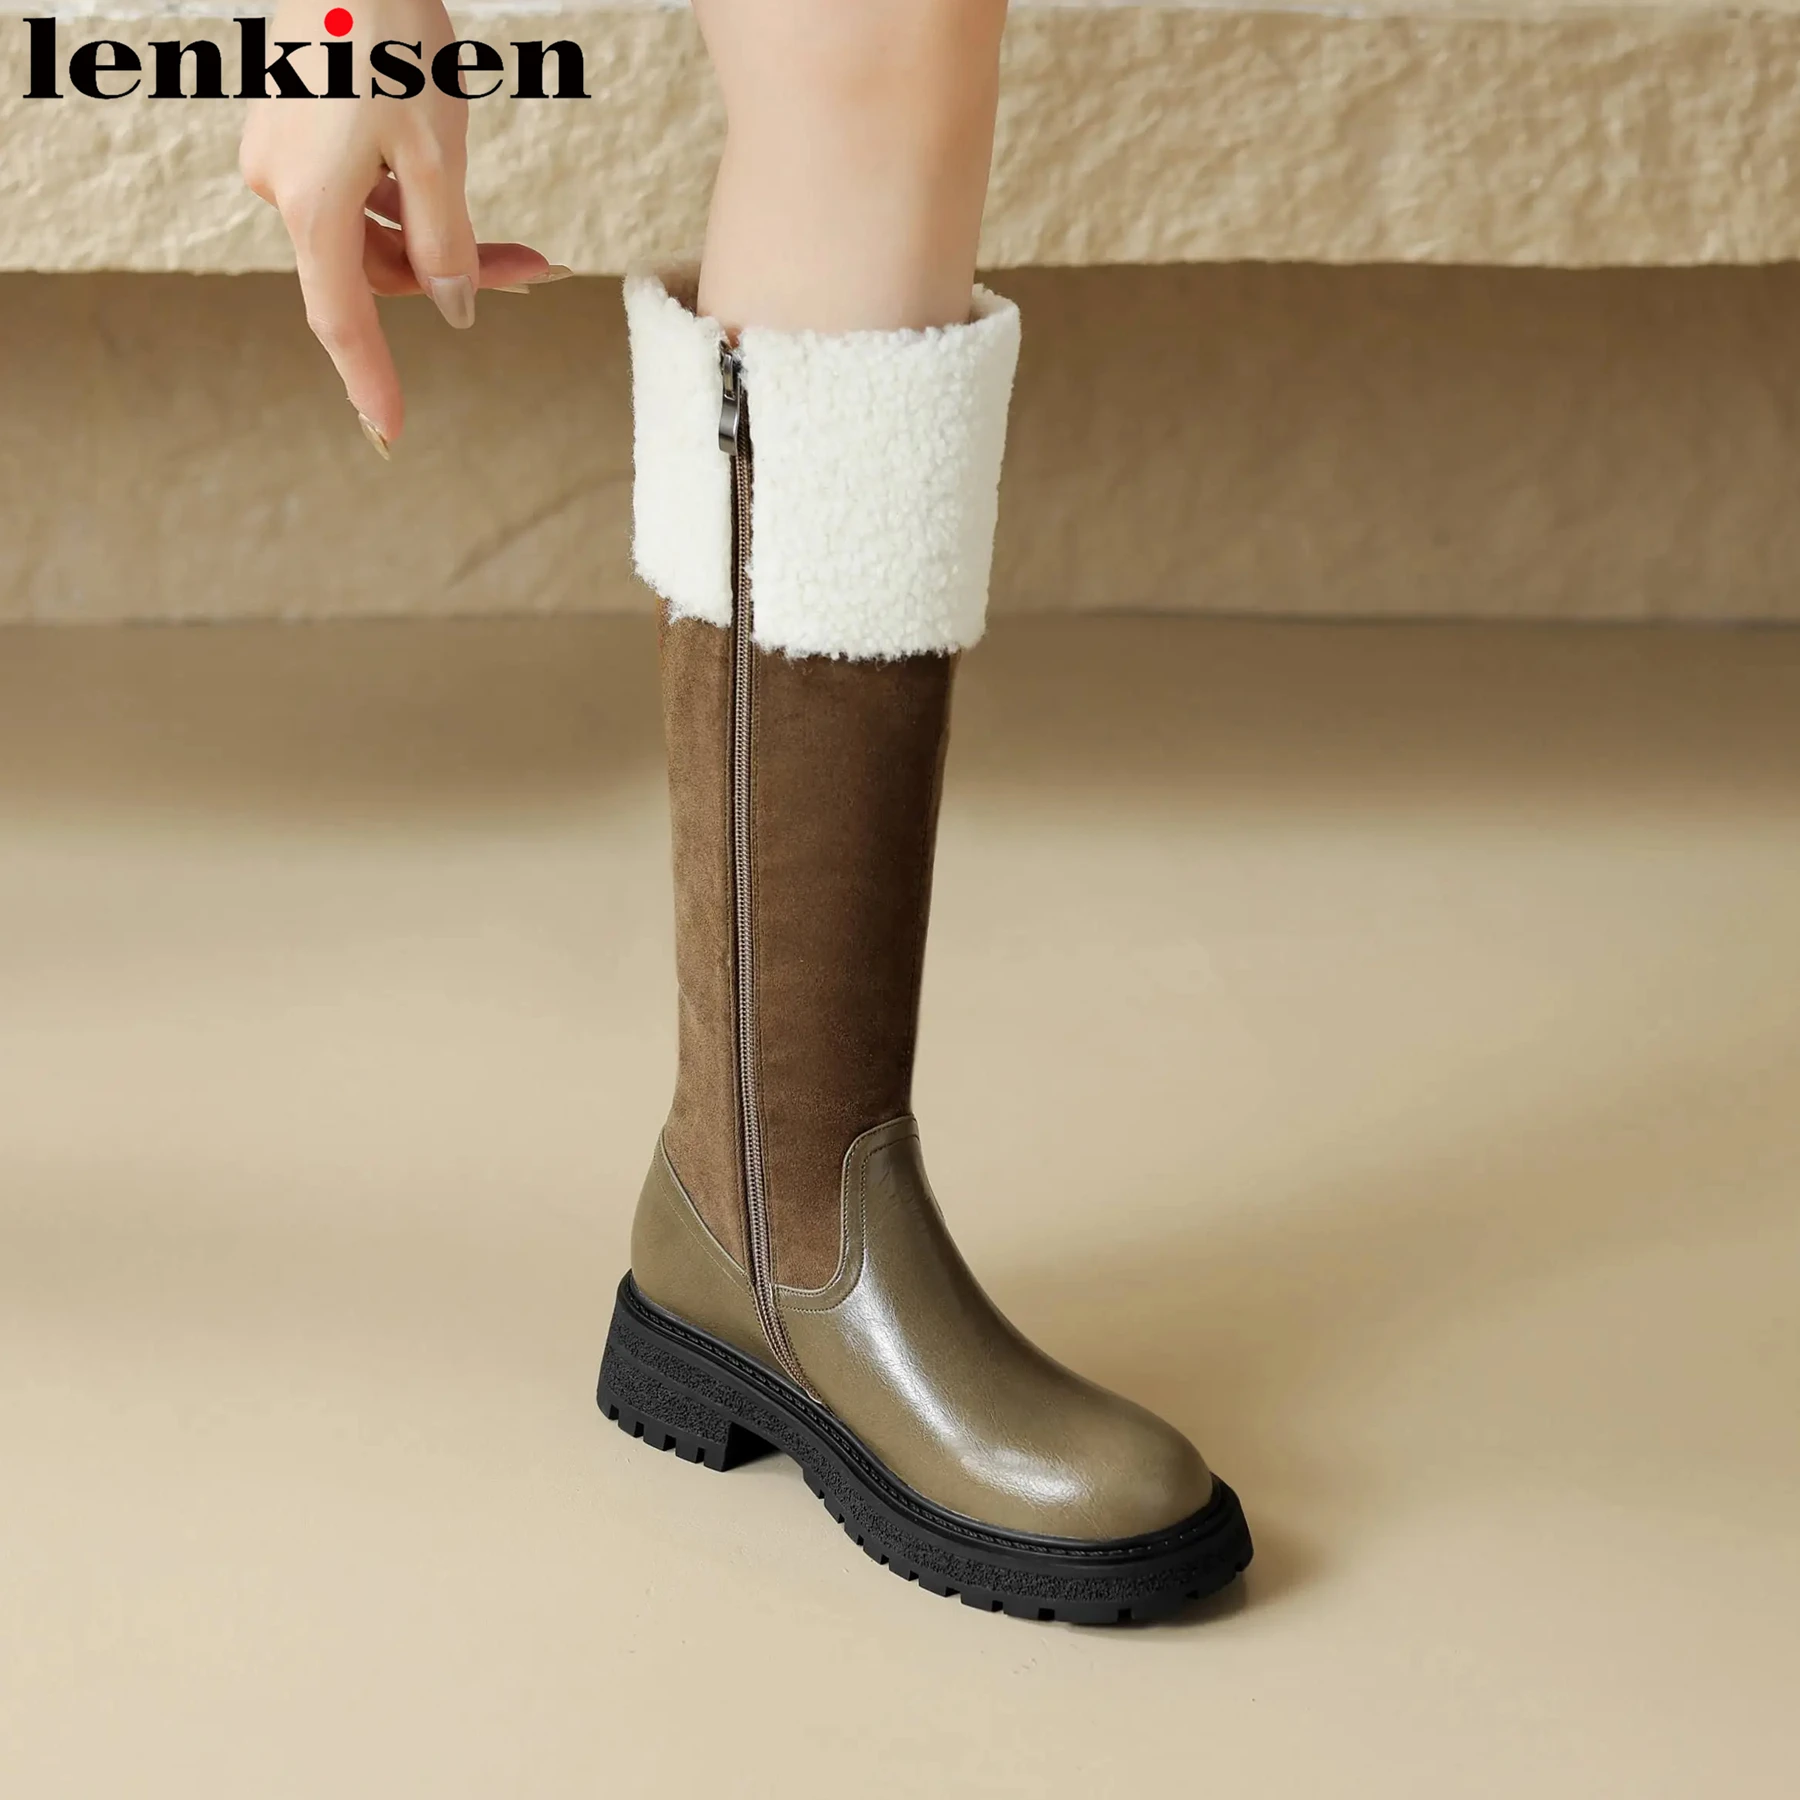 

Lenkisen Keep Warm Cow Leather Flock Round Toe Med Heels Riding Boots Winter Runway Warm Casual Brand Elegant Thigh High Boots